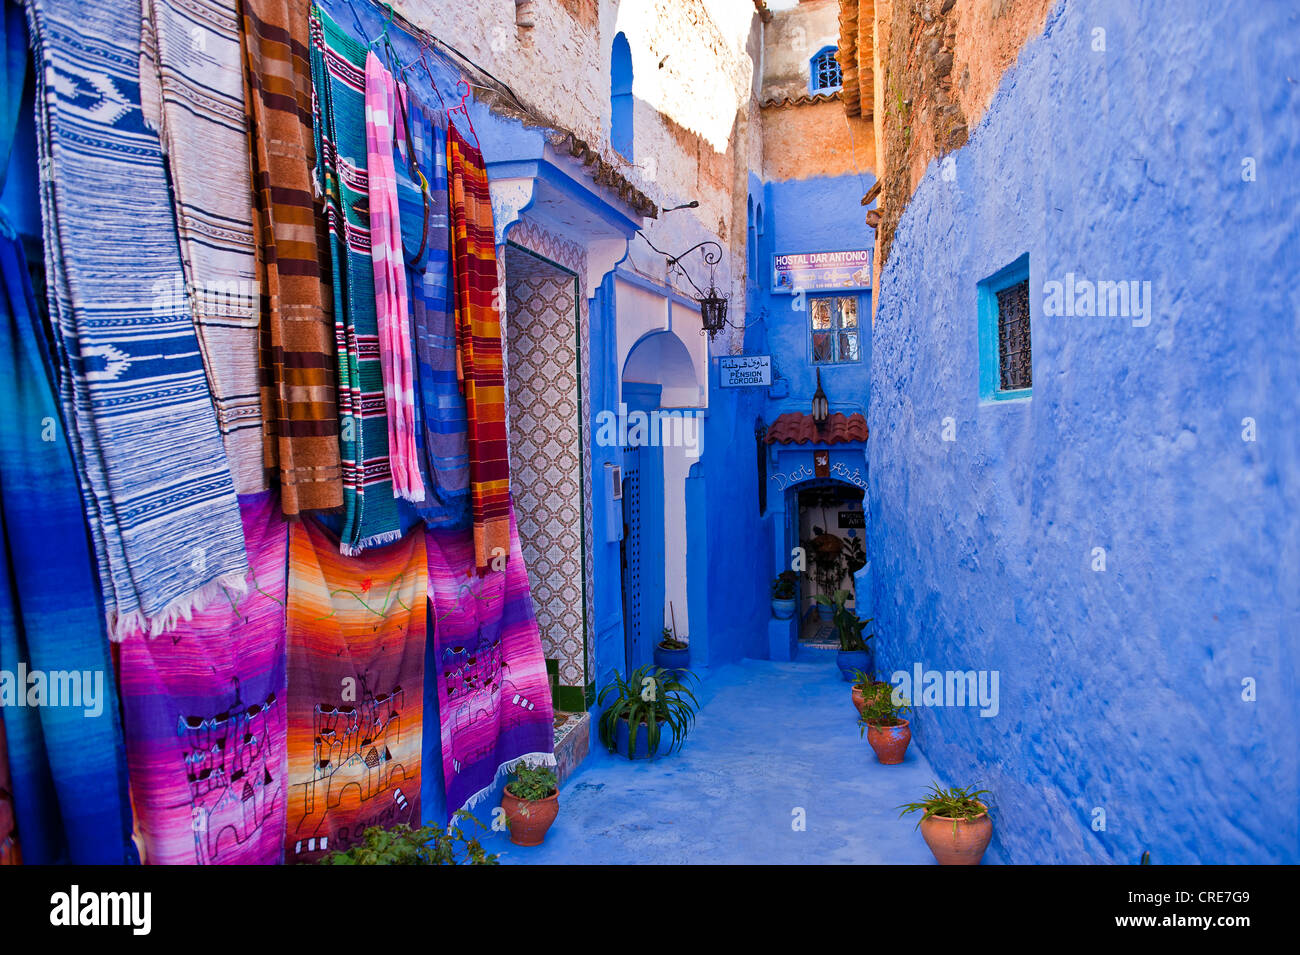 Narrow alleyway in Chefchaouen, walls and footpath are painted in blue, colourful blankets for sale hanging on the wall Stock Photo